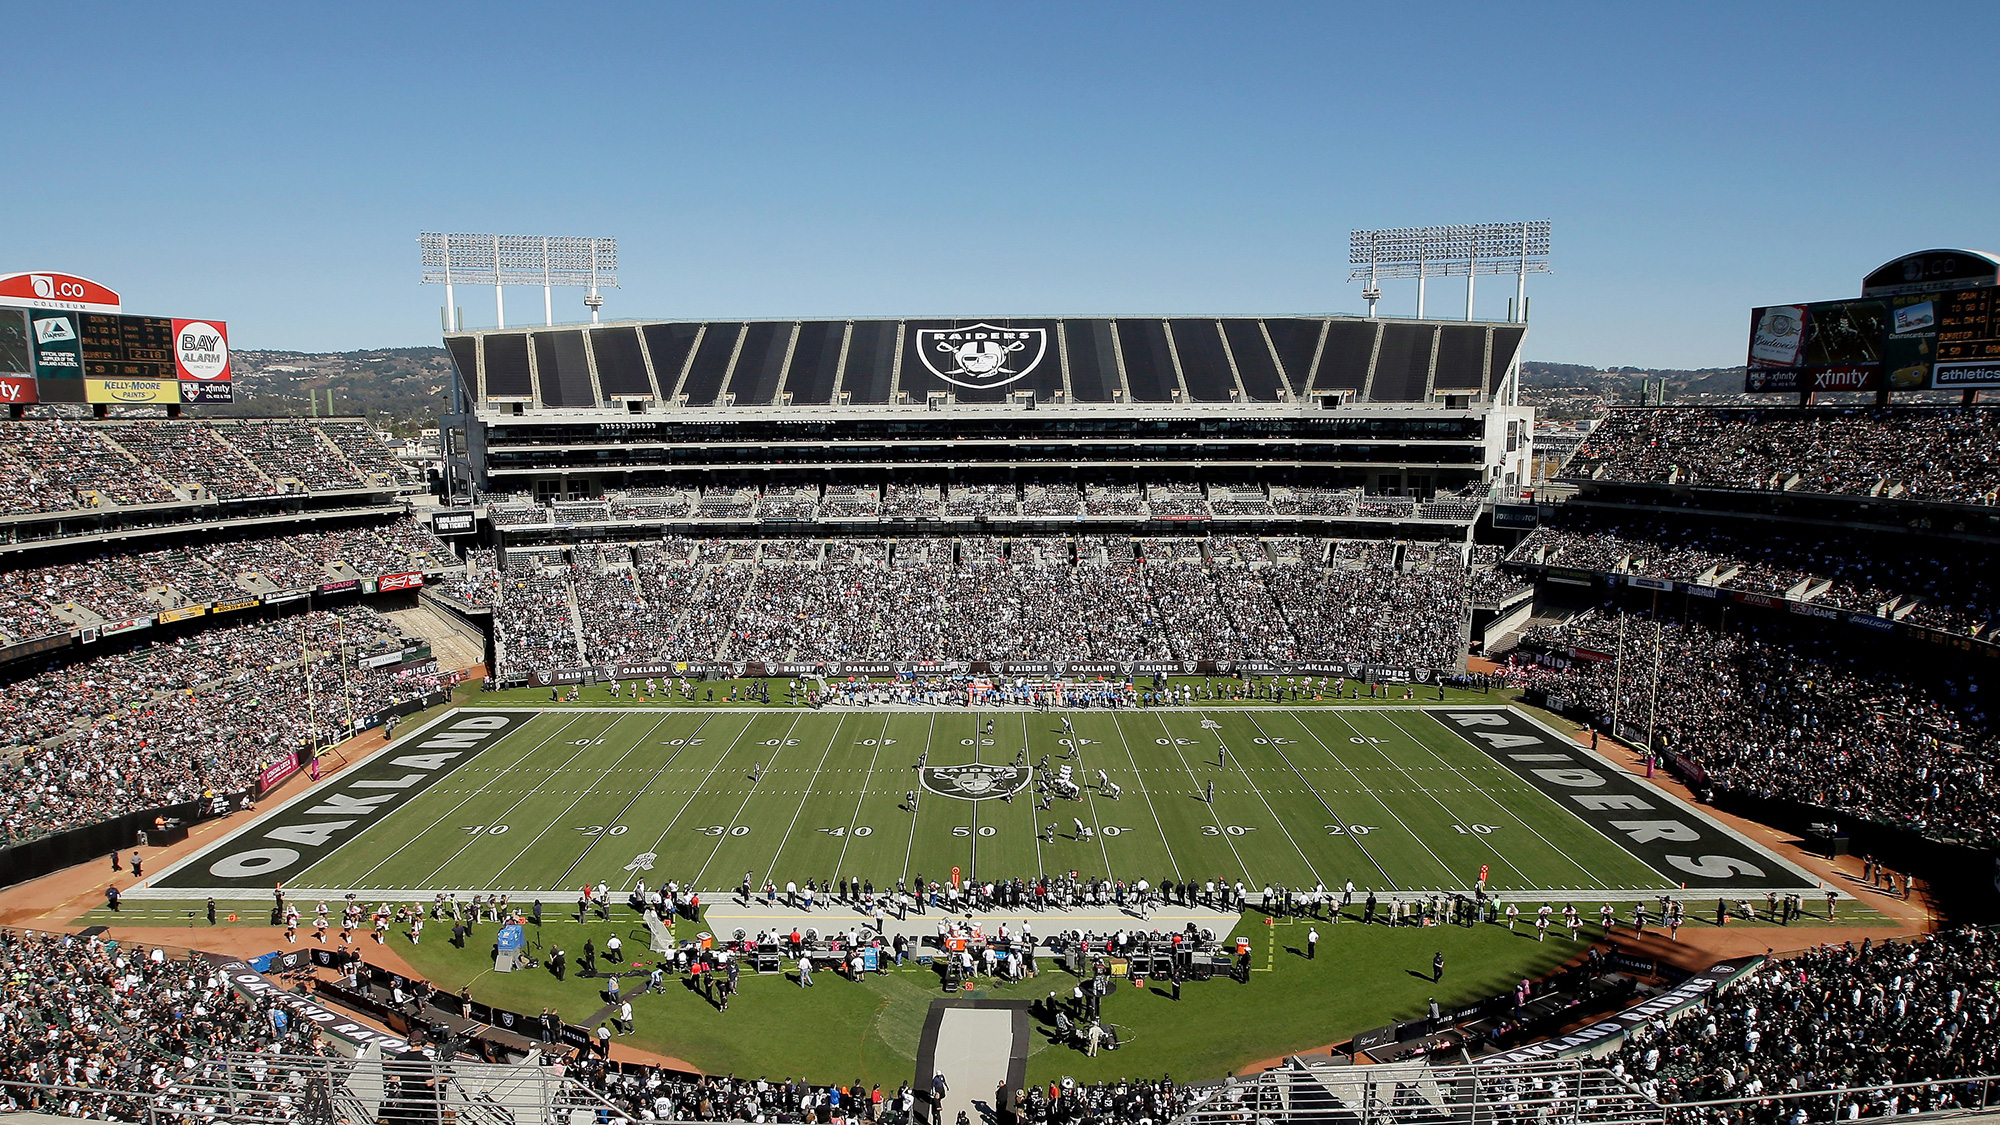 Raiders at 49ers: Battle of the Bay